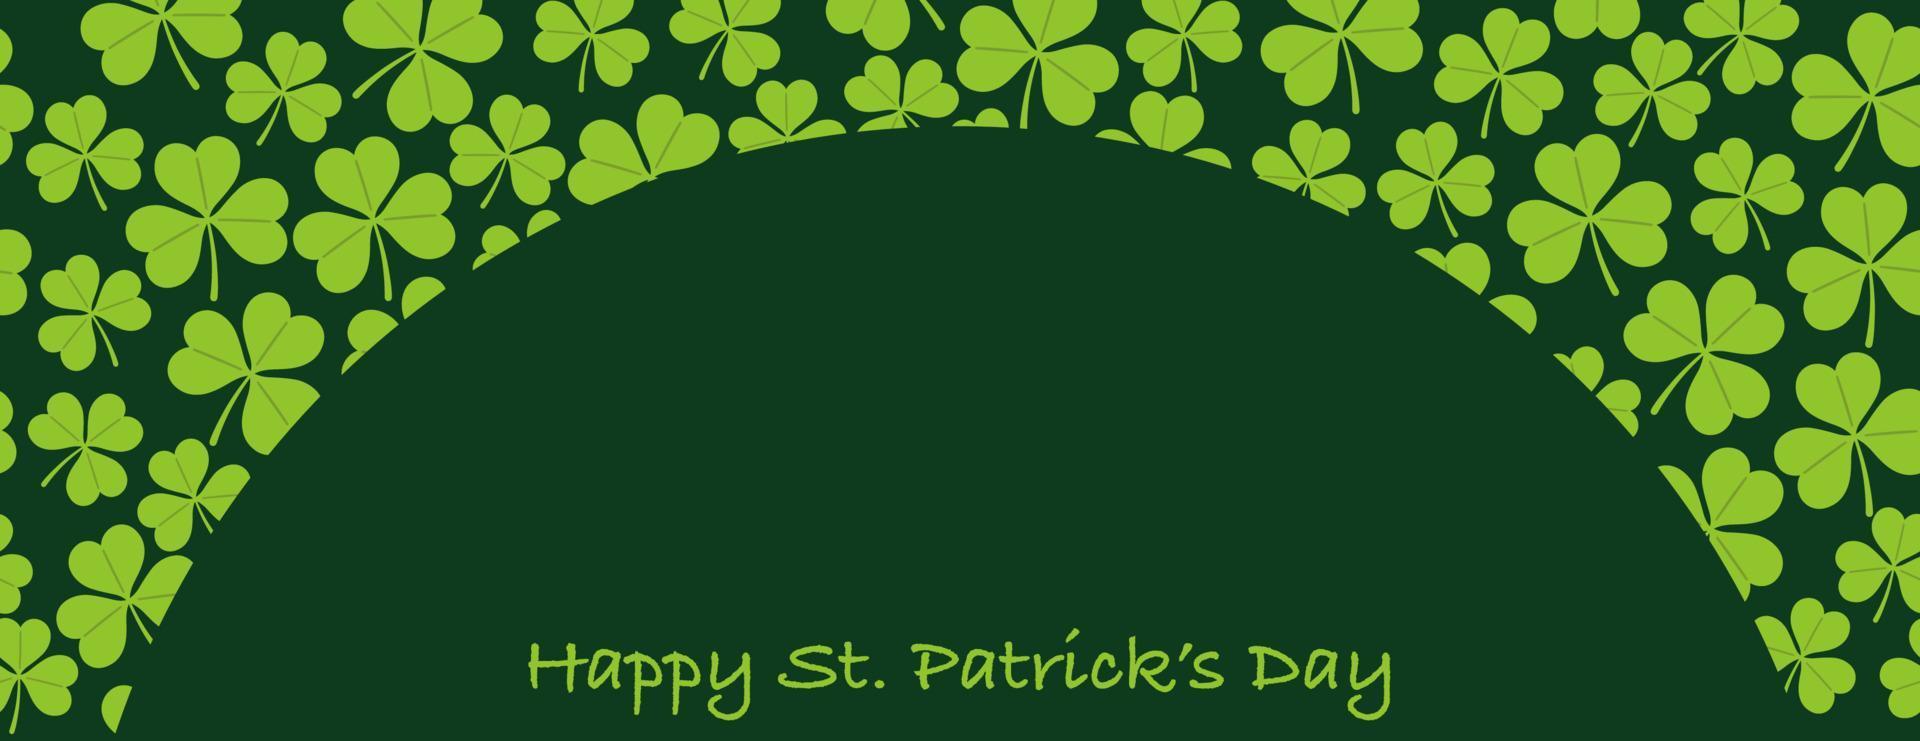 Vector Seamless Clover Background Illustration For St. Patricks Day. Horizontally Repeatable.